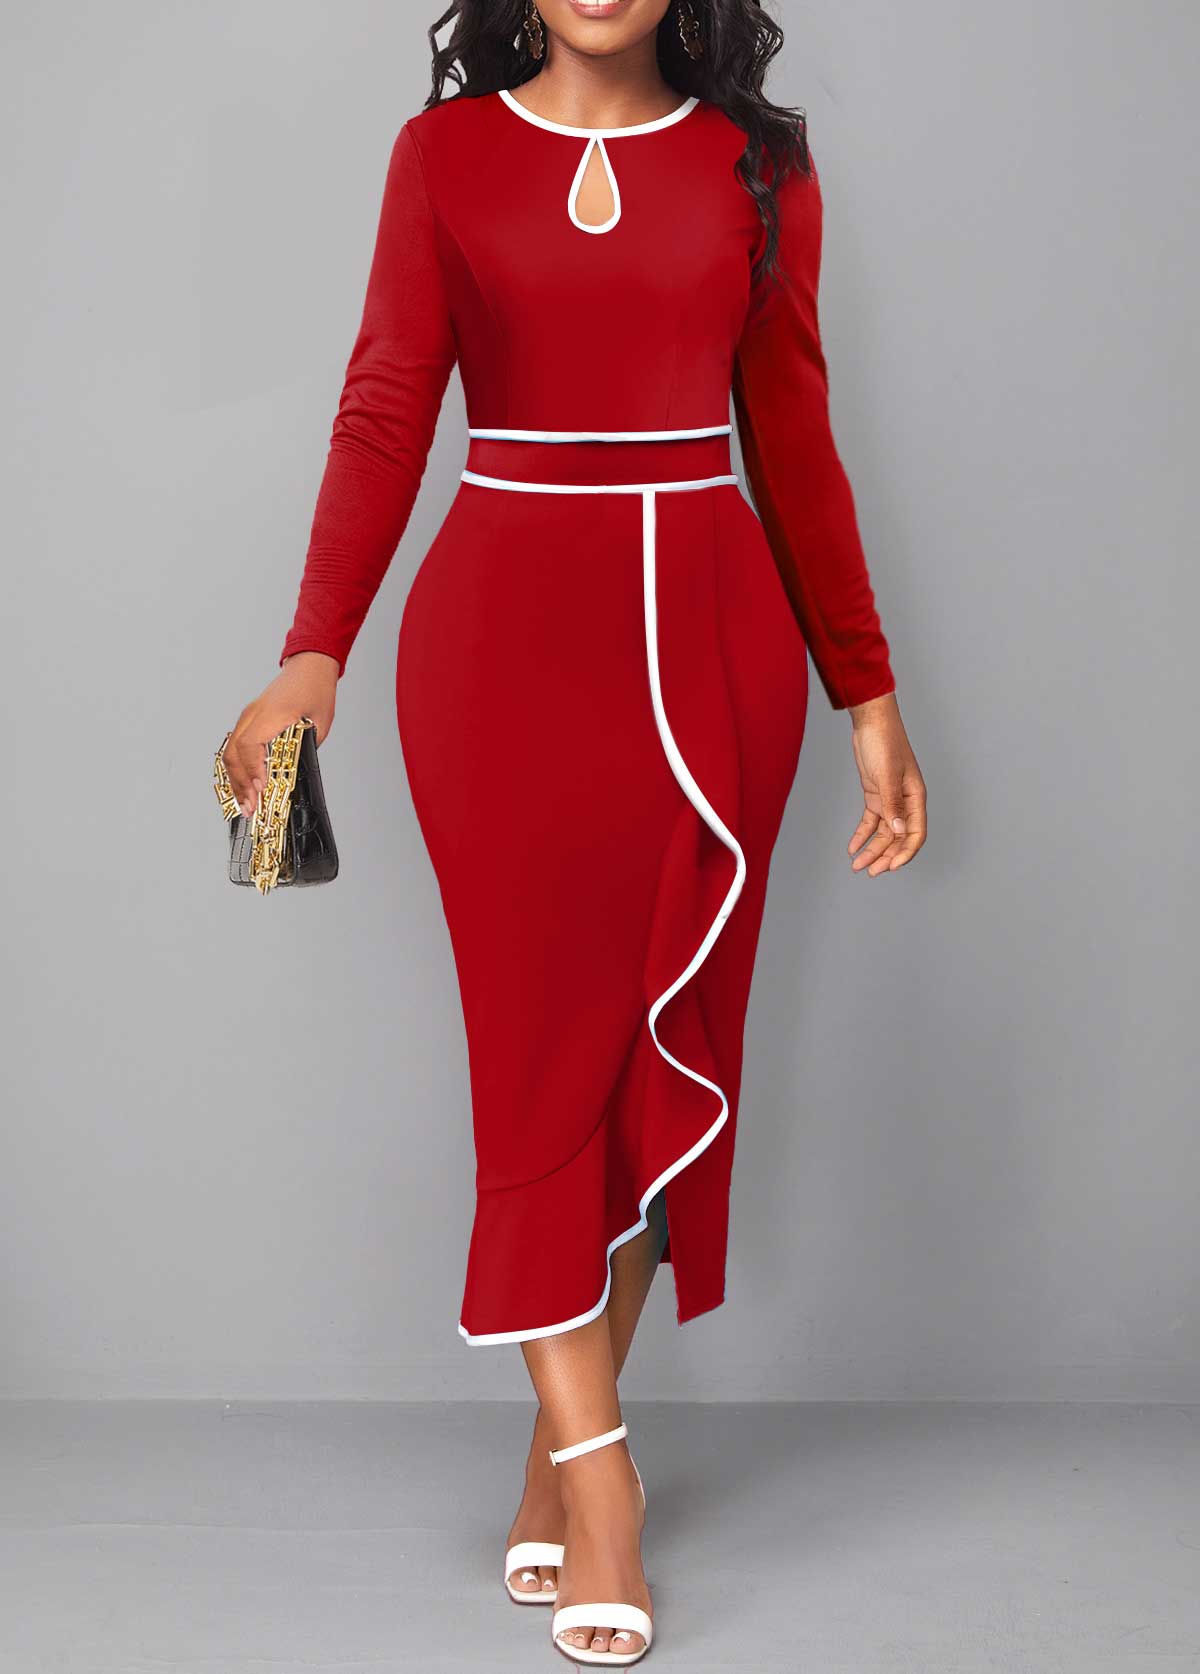 Red Contrast Binding Round Neck Bodycon Dress | Rosewe.com - USD $34.98